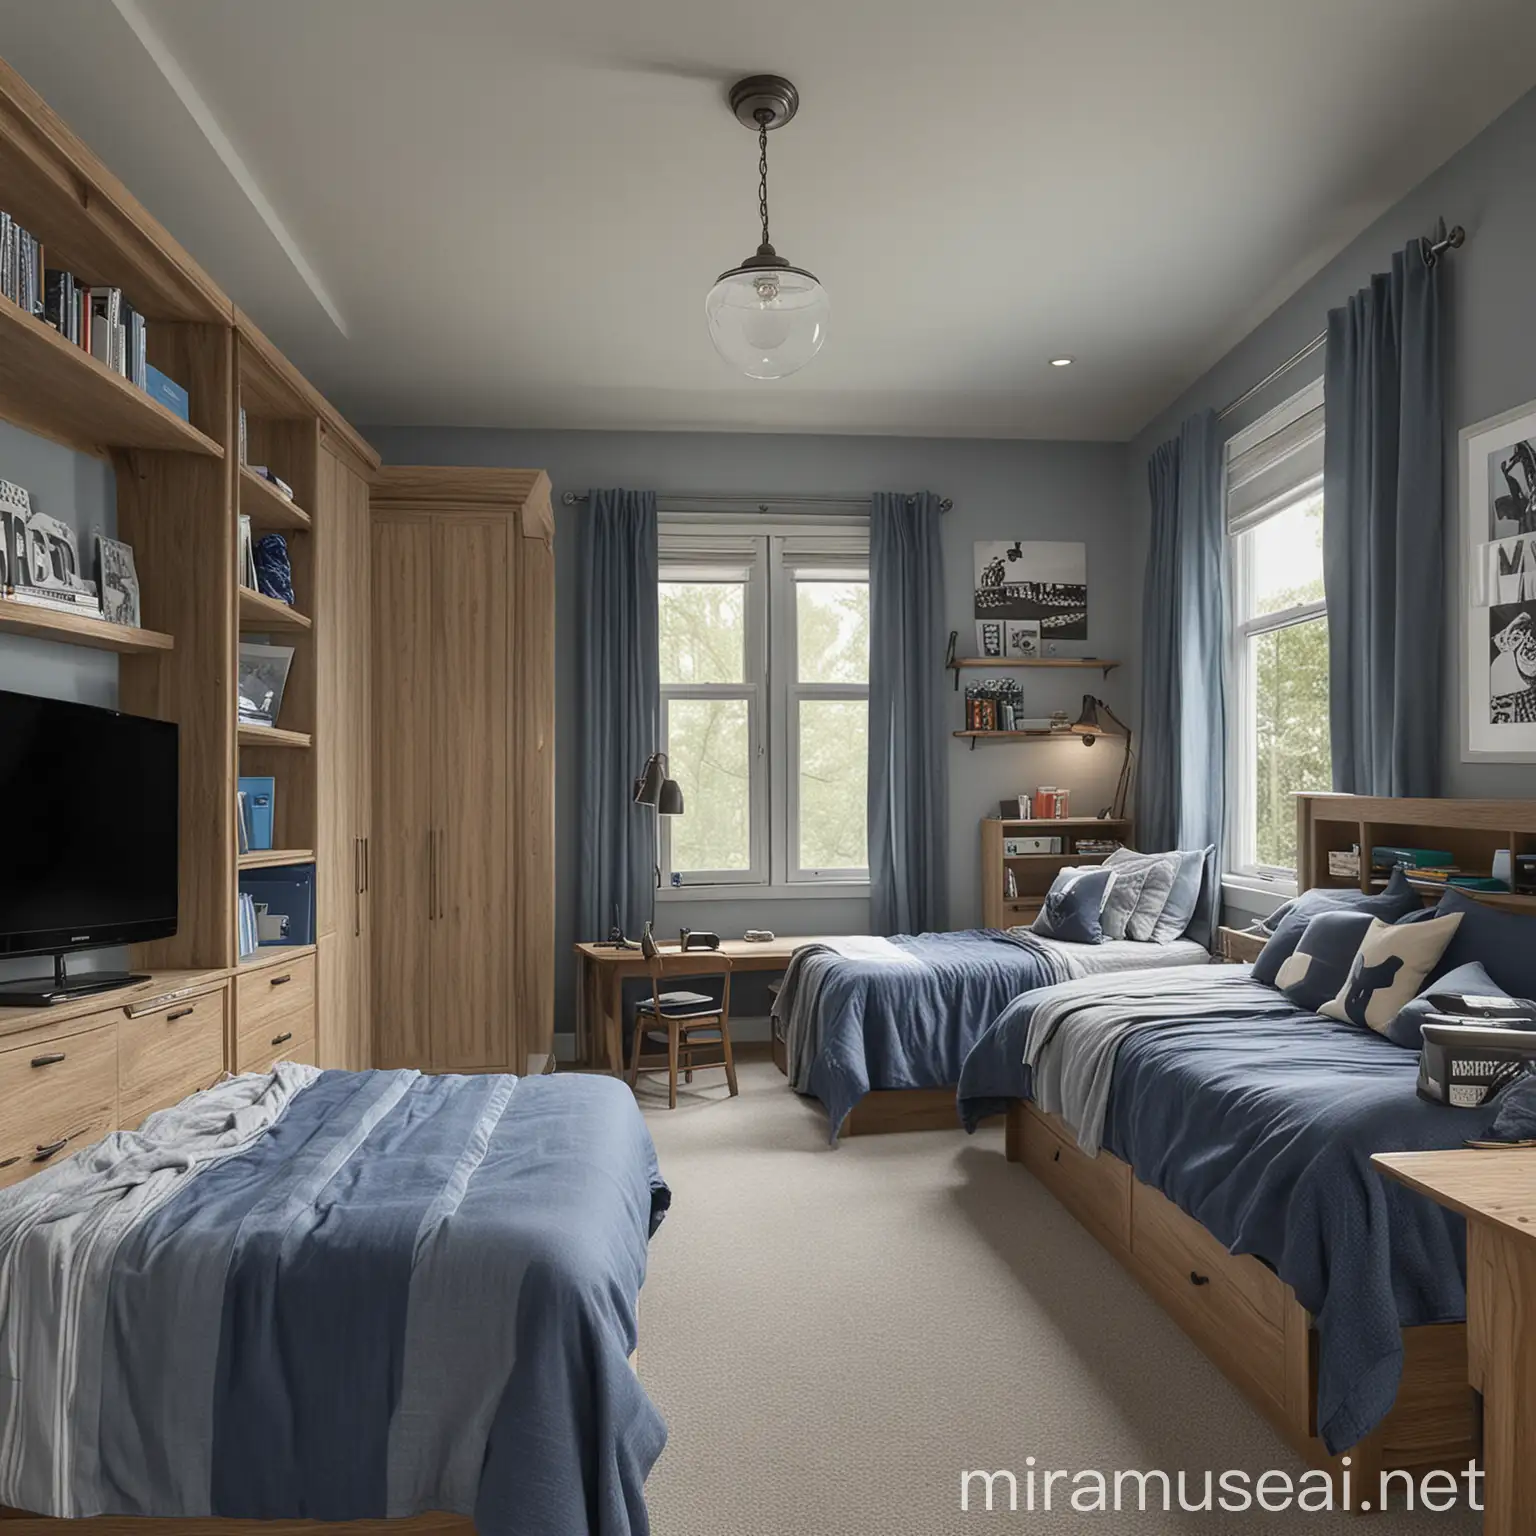 Twin Boys Bedroom with Desks Wardrobe and TV in Grey and Blue Decor